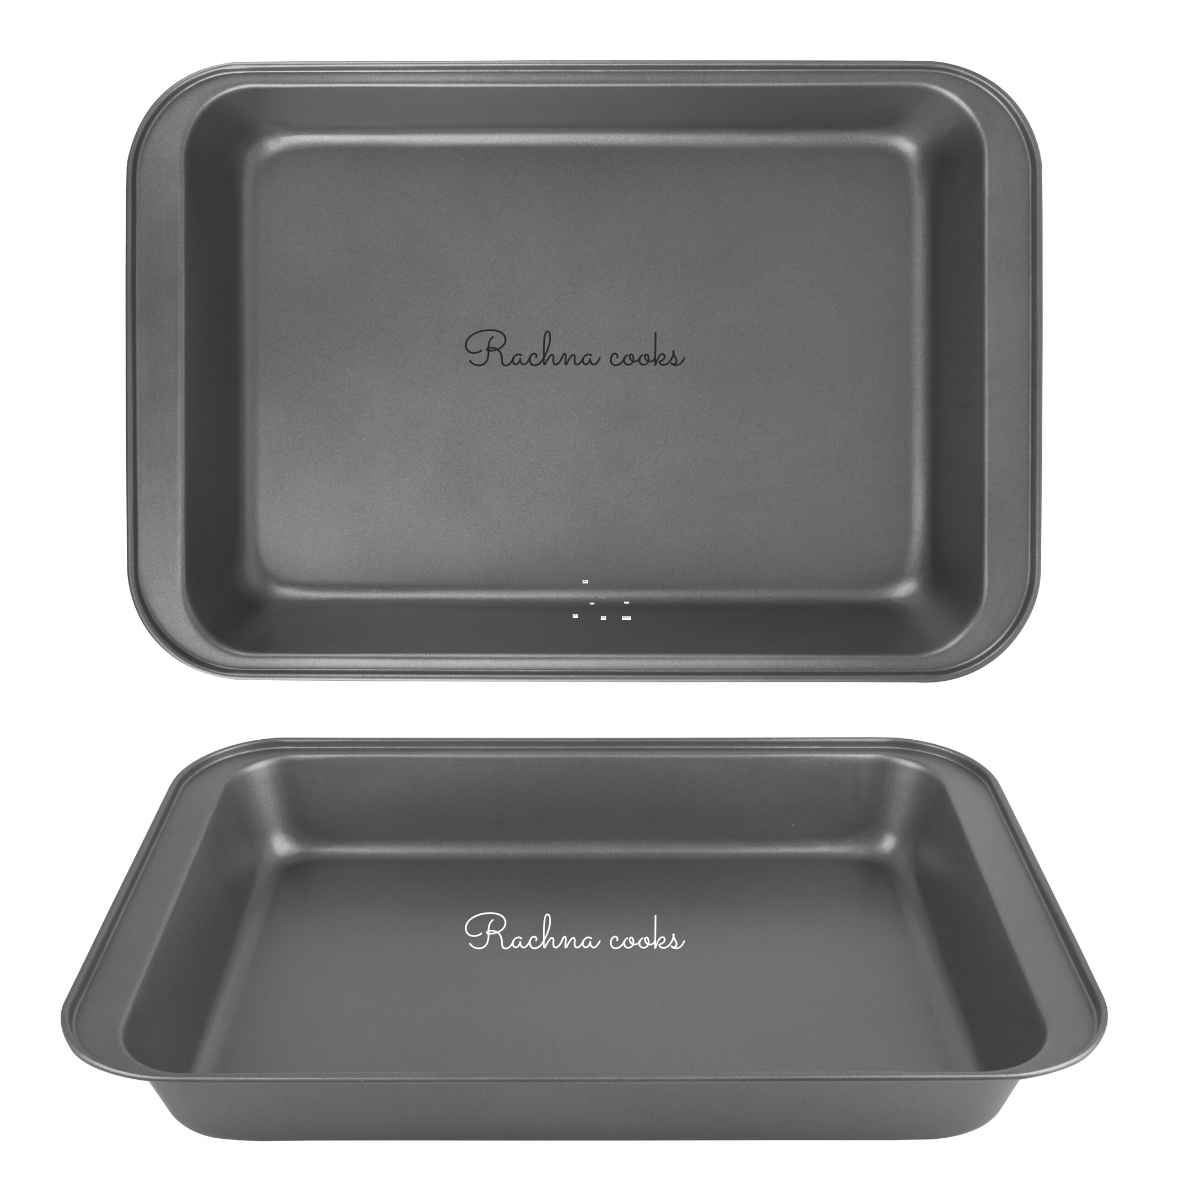 Two Baking trays